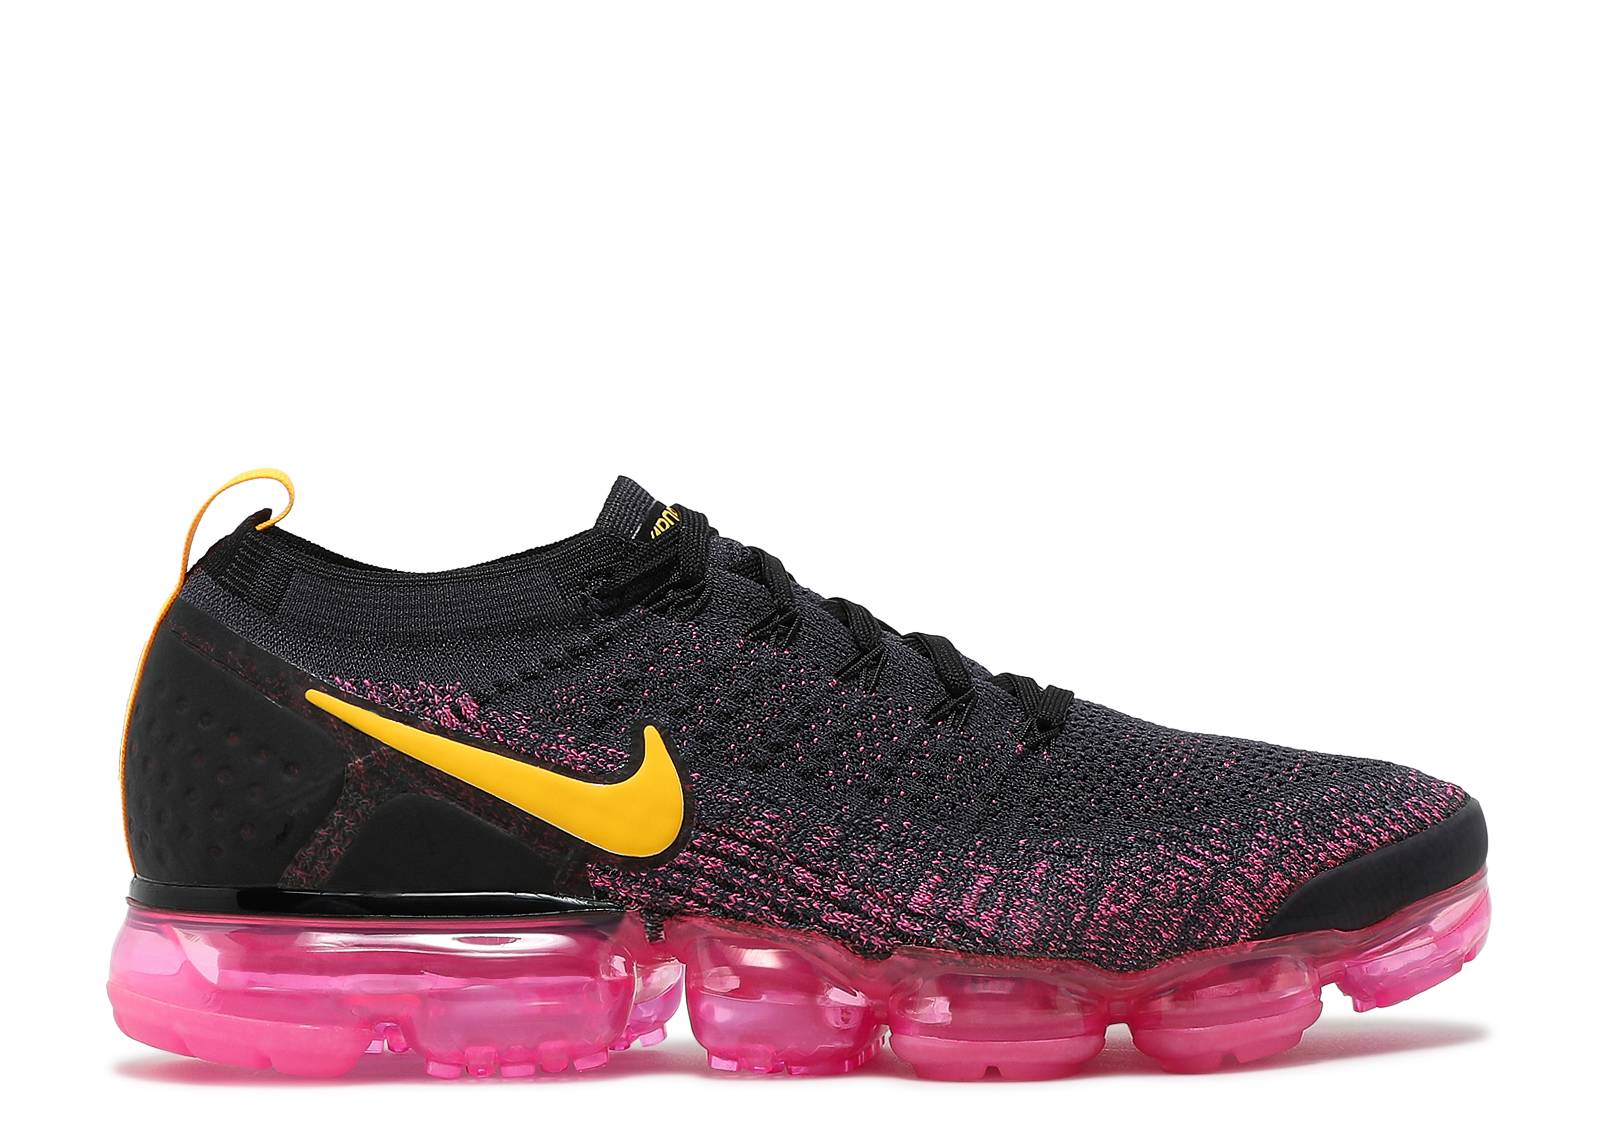 Wmns Air VaporMax Flyknit 2 'Pink Blast'Color:Pink,Size:5